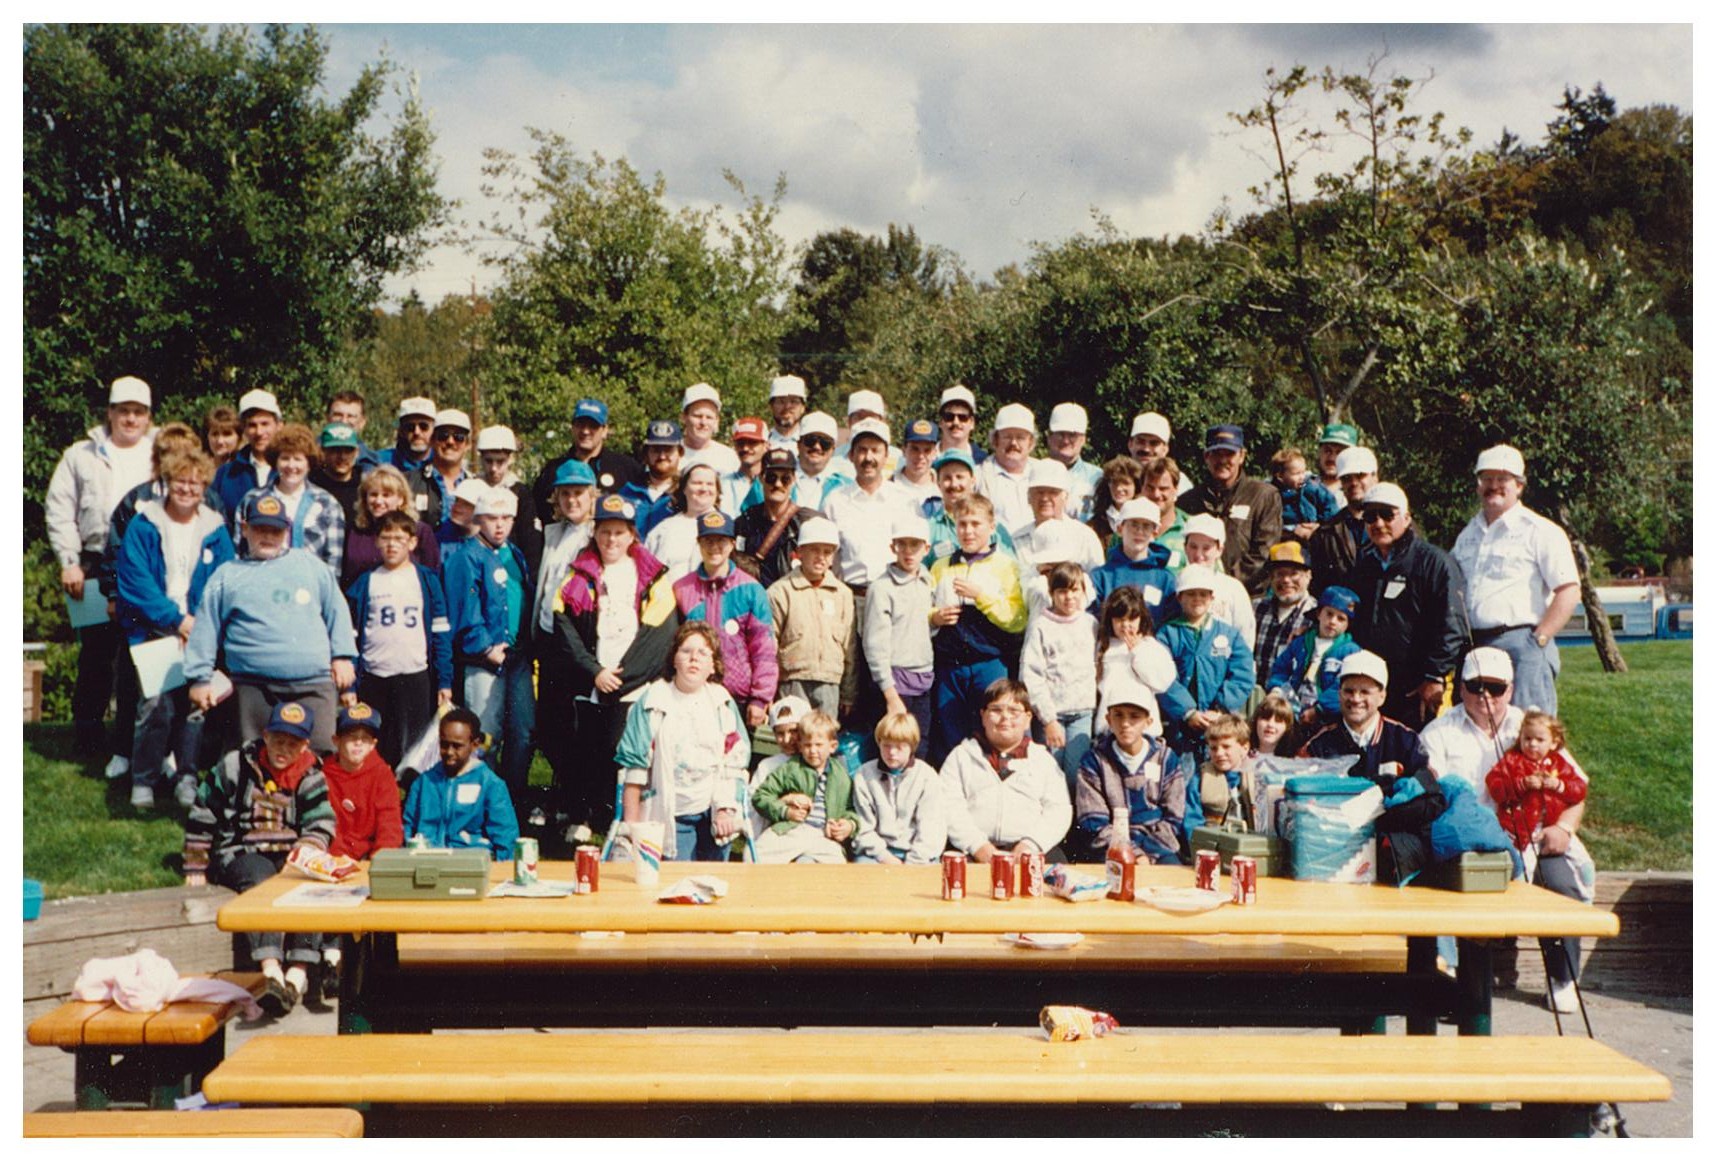 The First Ever C.A.S.T. for Kids Event in 1991